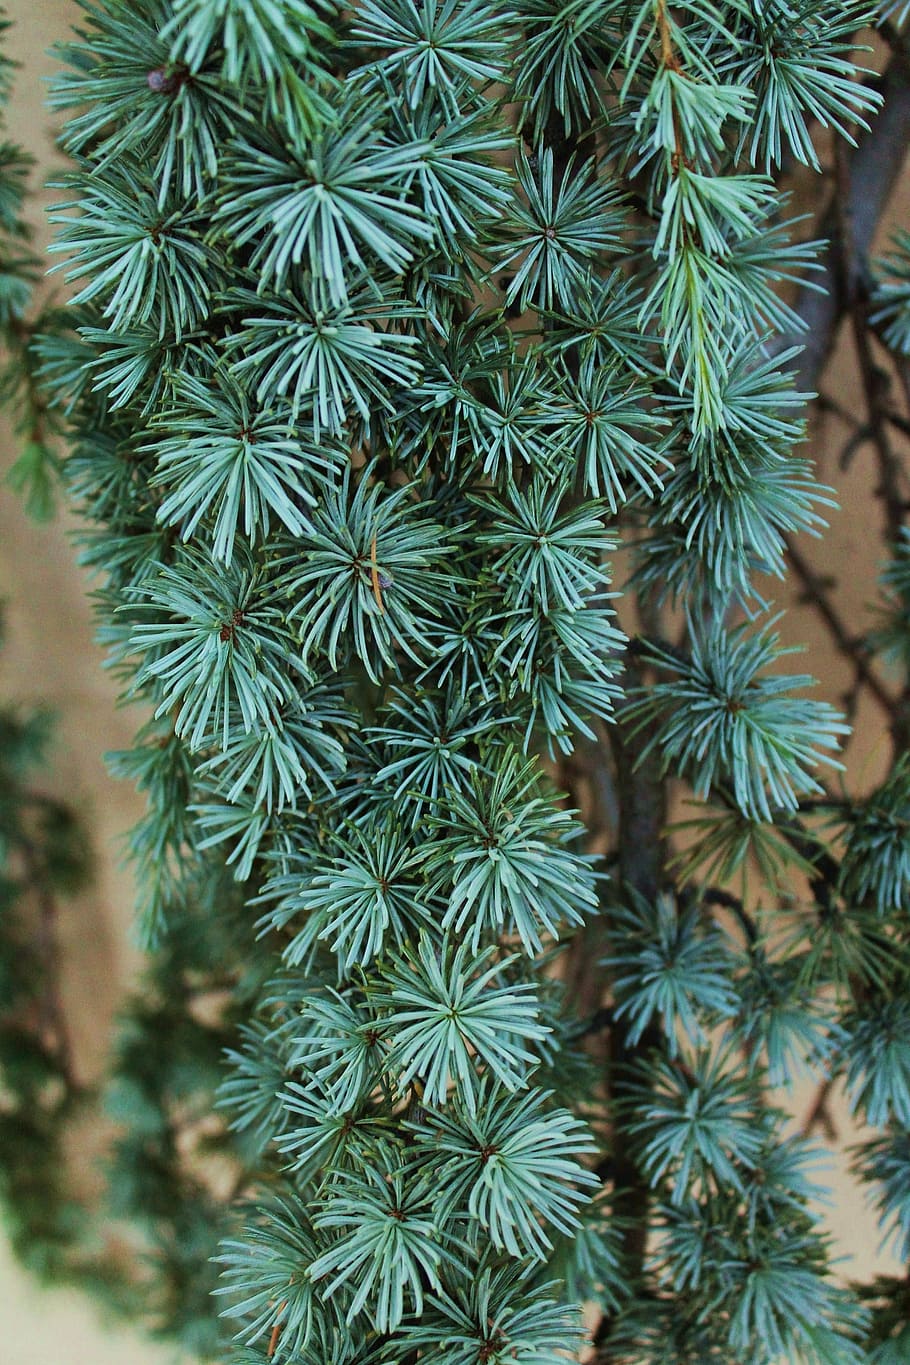 pine tree, weeping tree, green, pine needles, branches, evergreen